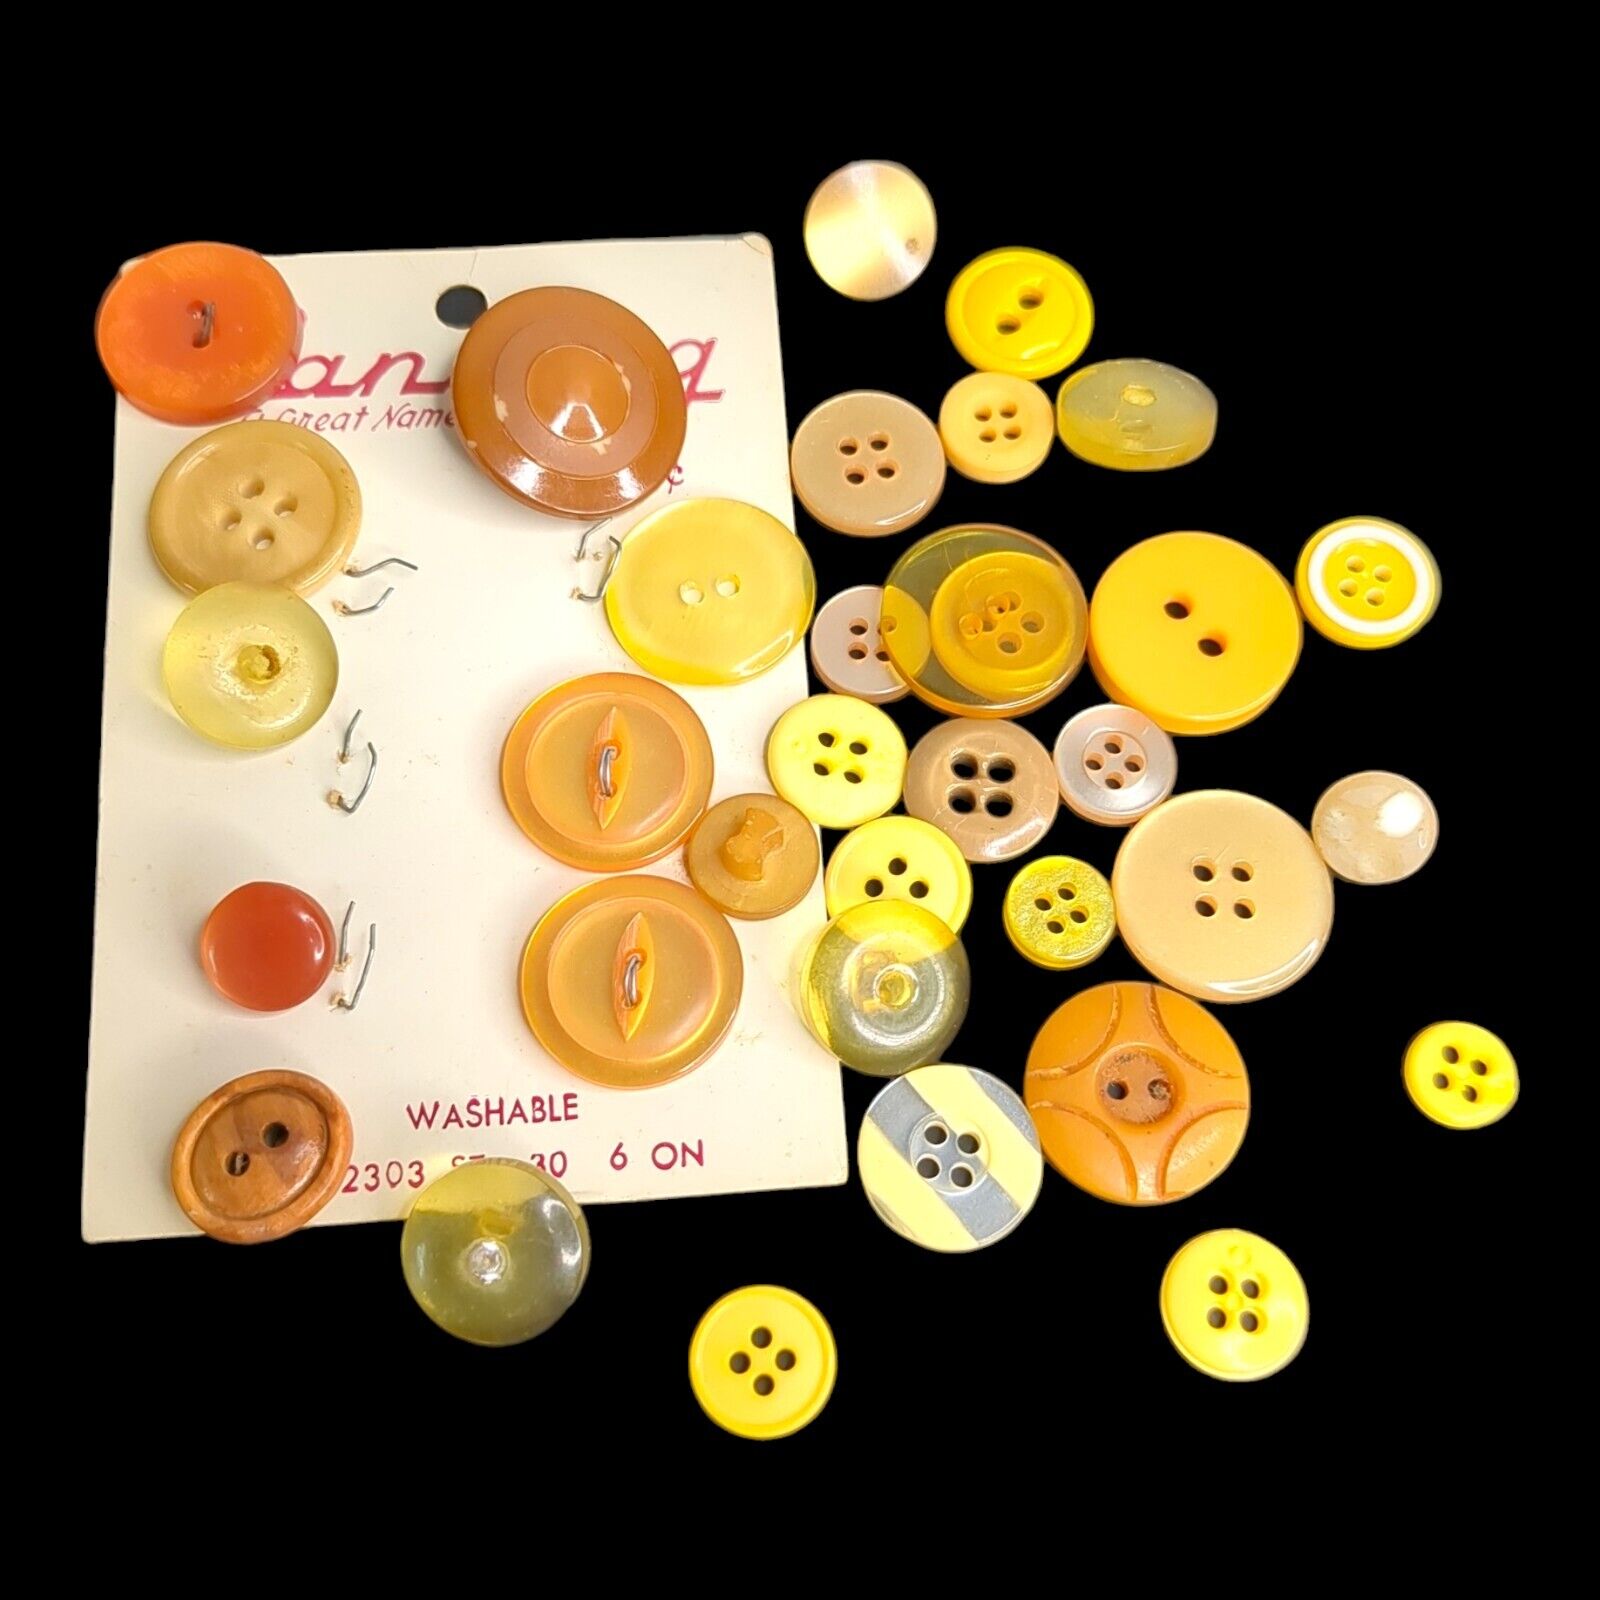 Lot 30+ Vintage Estate Sale Buttons Various Sizes Mostly Gold Black Brown Usable